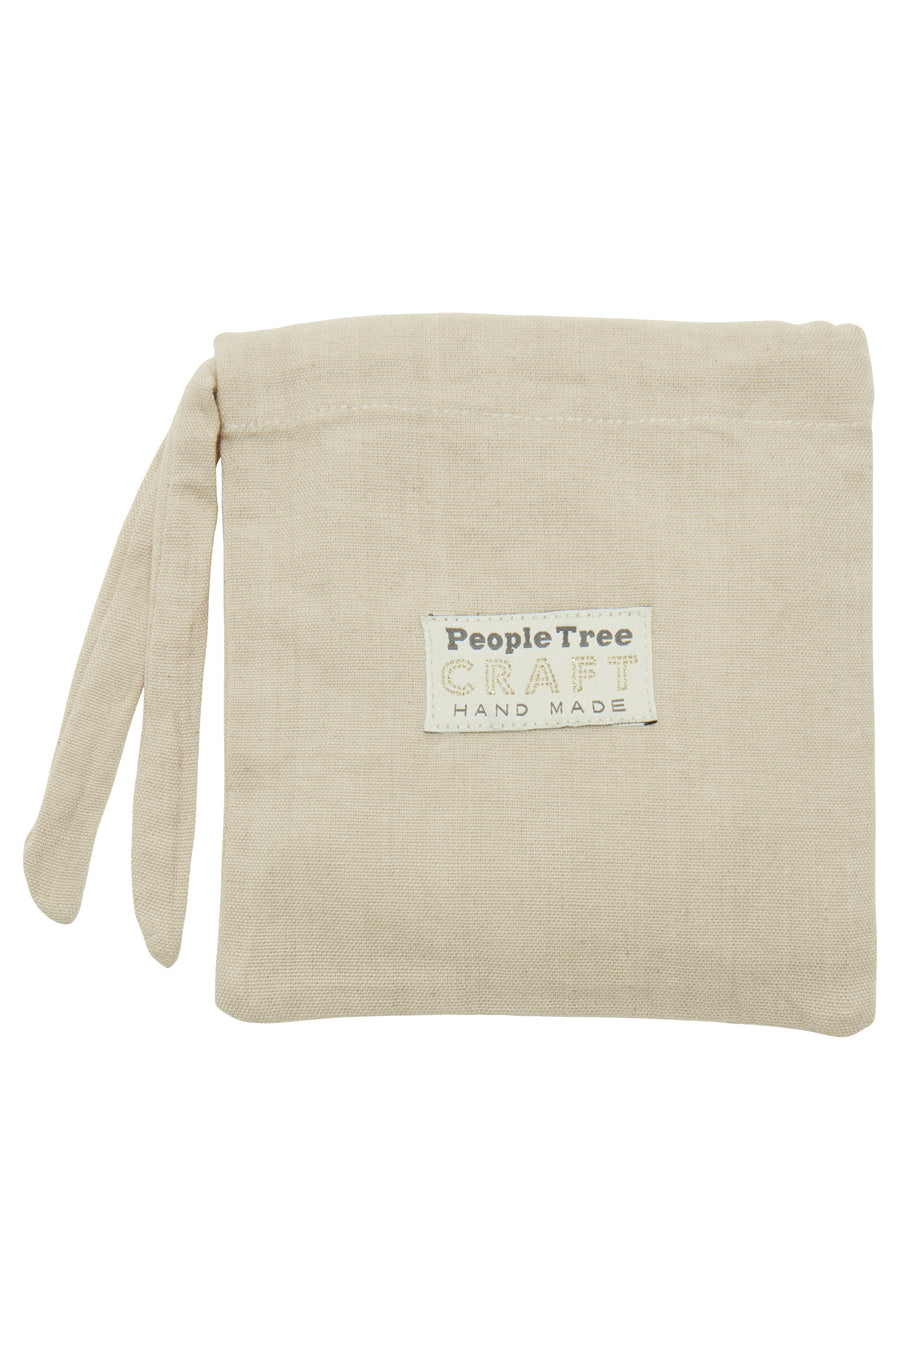 Jewellery Bag / Pouch in Recycled People Tree Fabrics